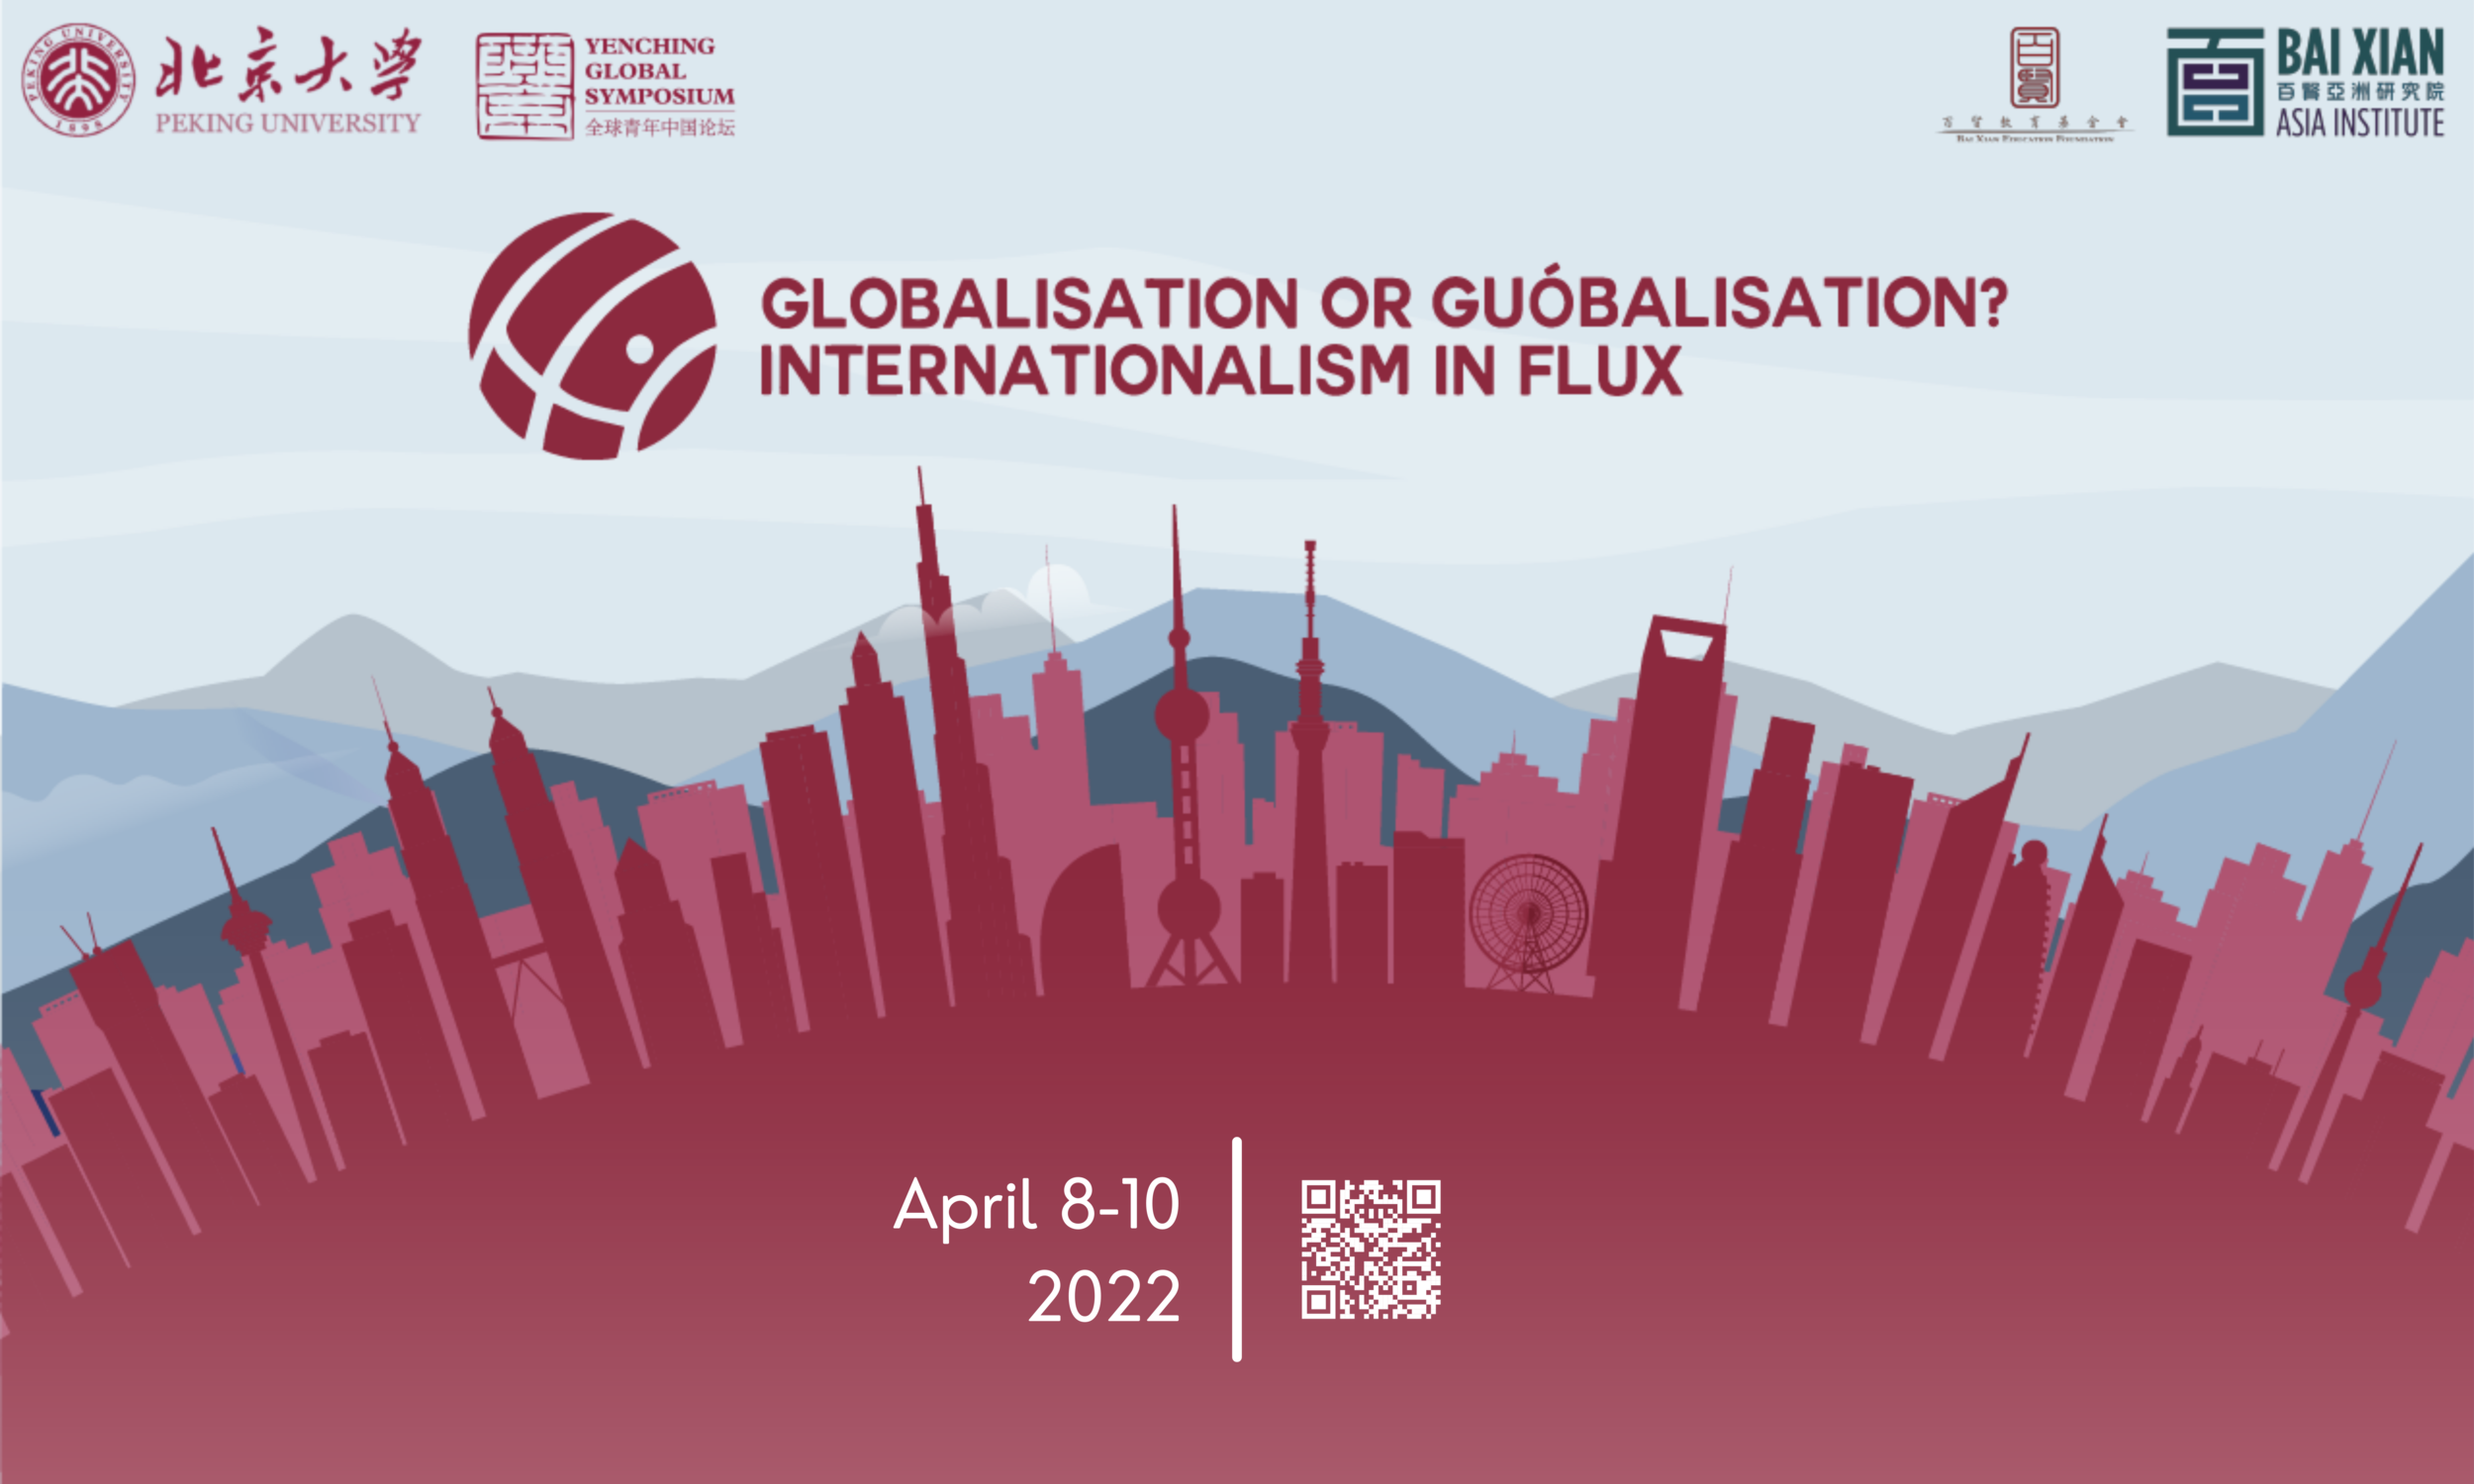 Yenching Global Symposium 2022 for Young Professionals and Graduate students (Fully-funded)